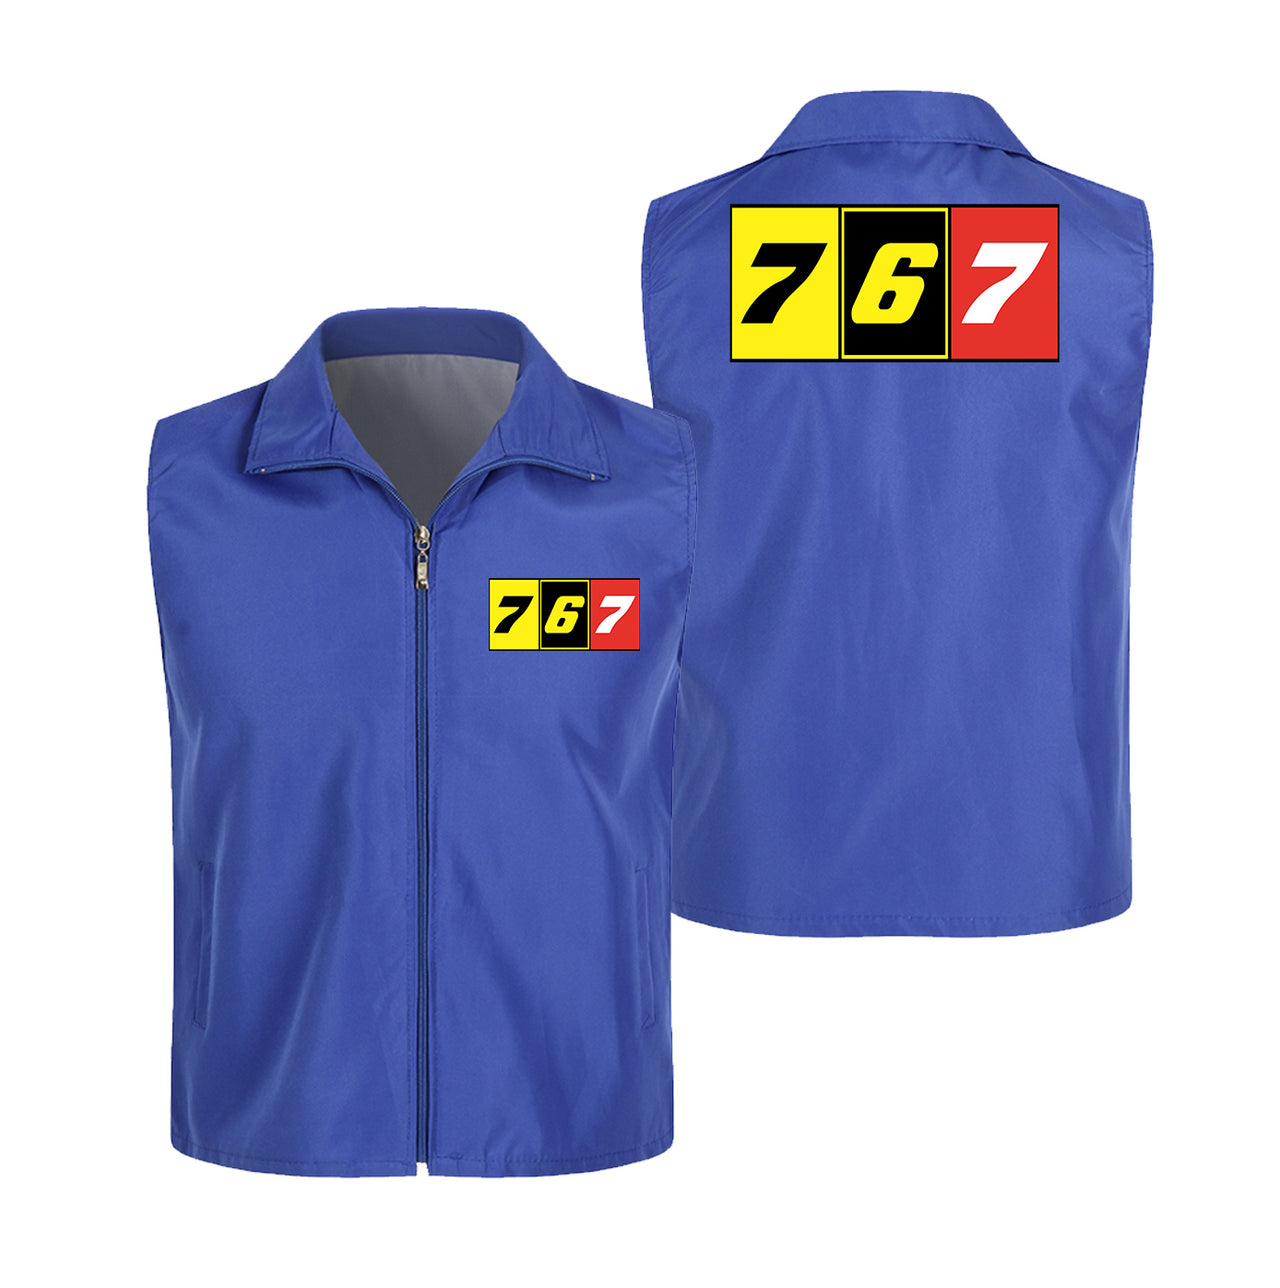 Flat Colourful 767 Designed Thin Style Vests